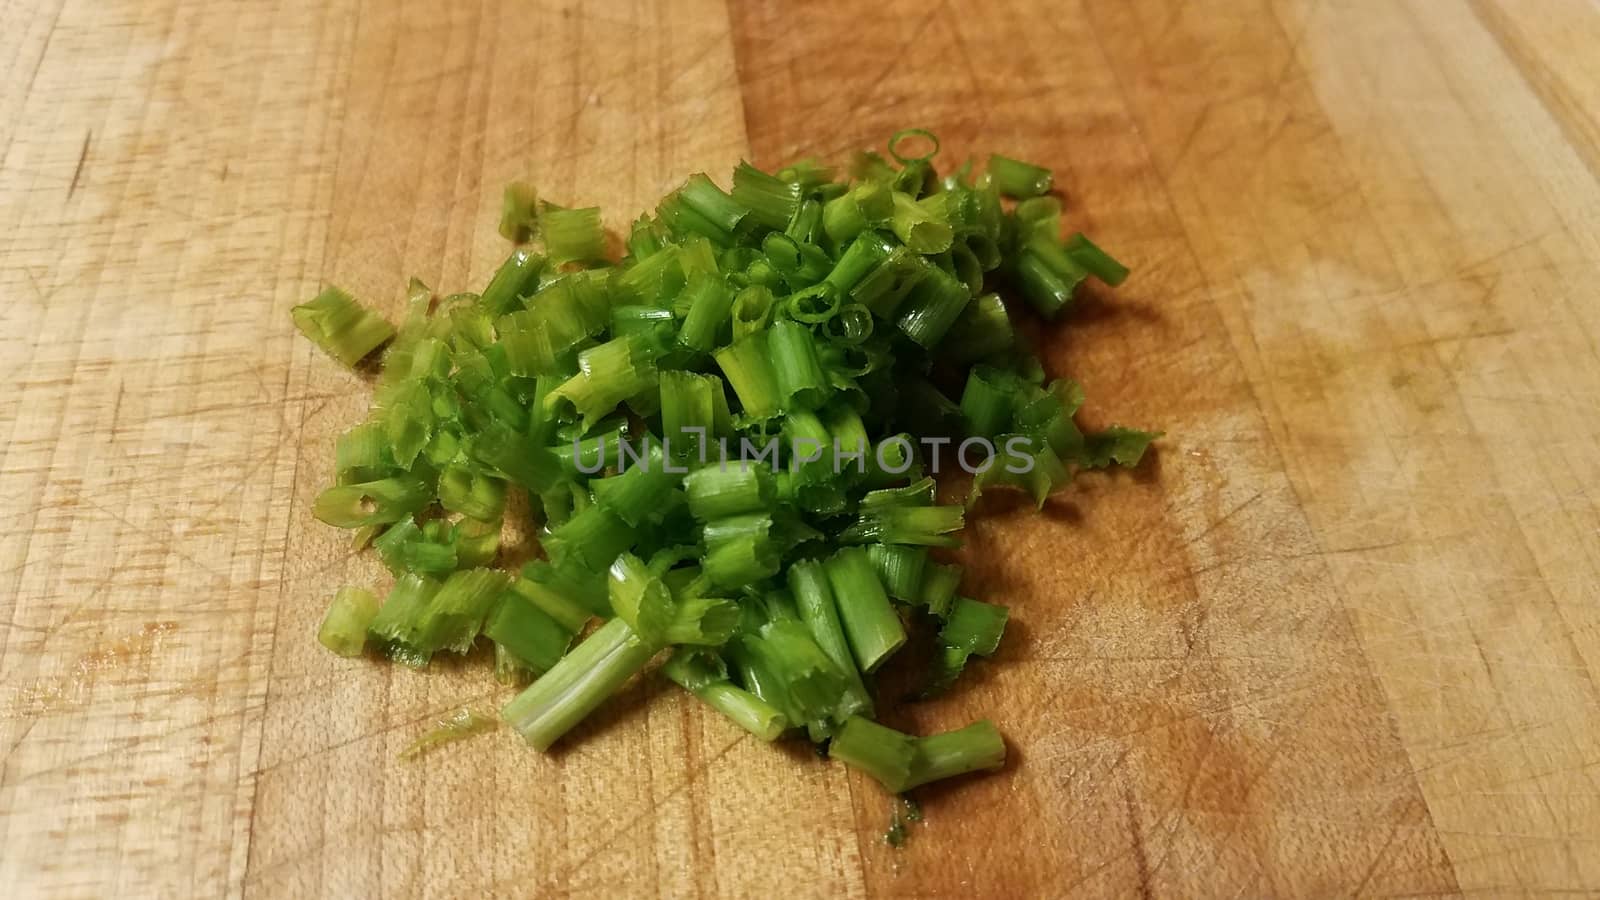 green chives or onions on wood cutting board by stockphotofan1